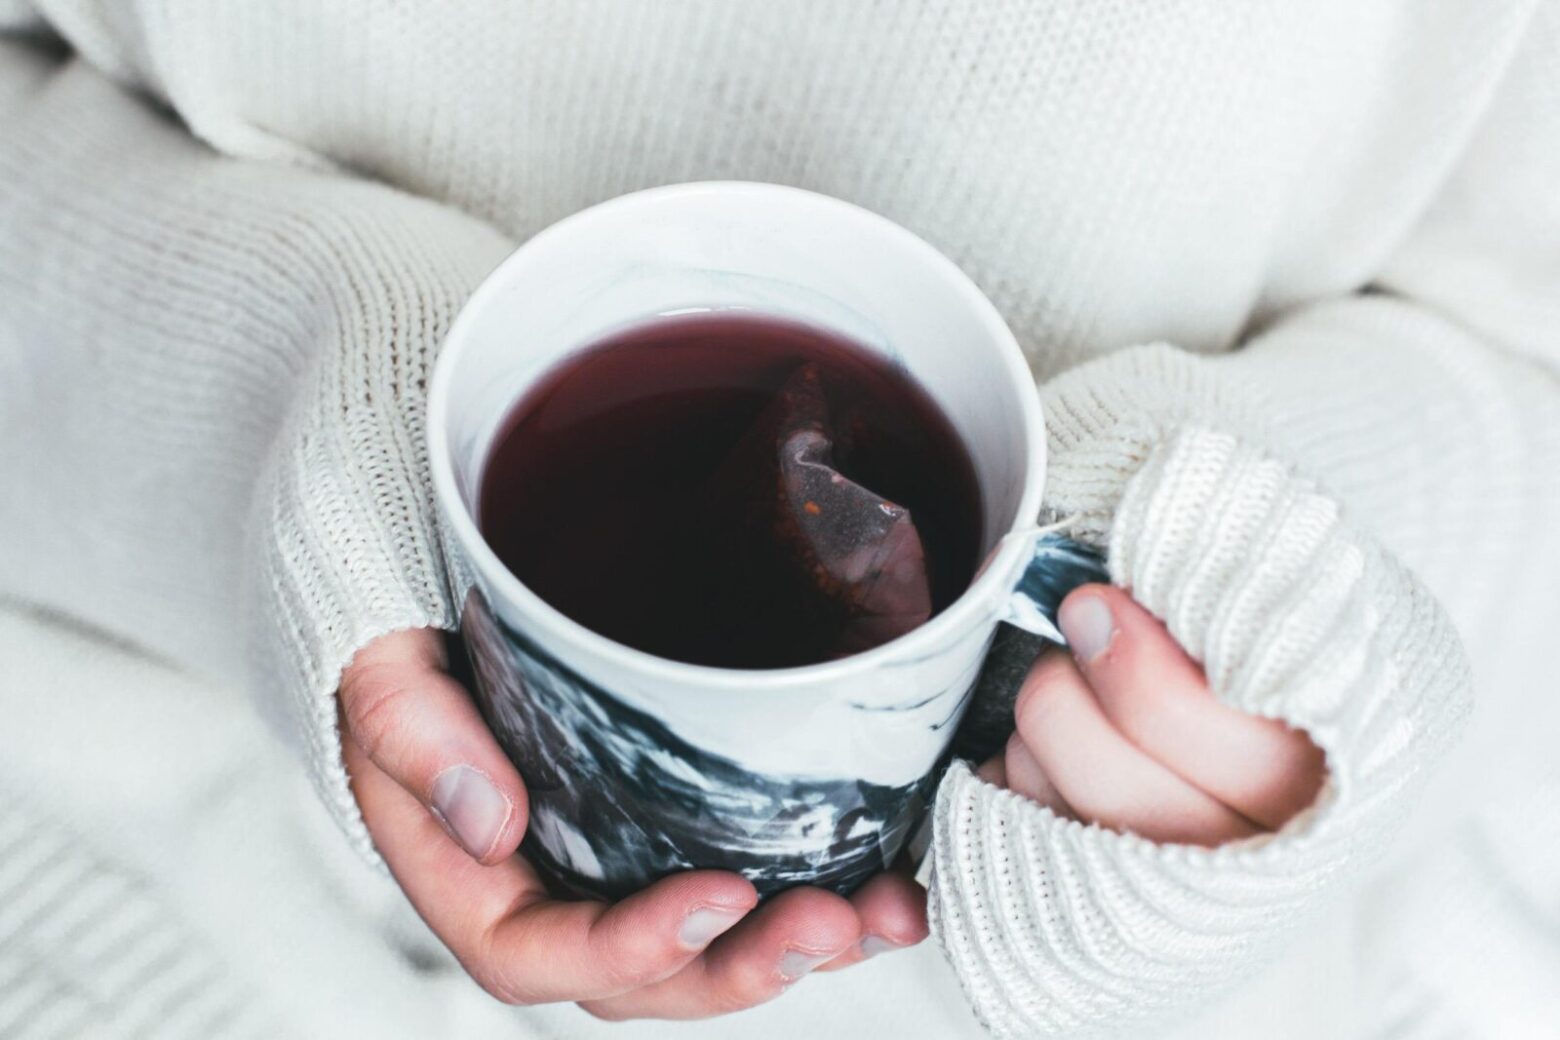 From above, hands holding a mug of herbal tea.